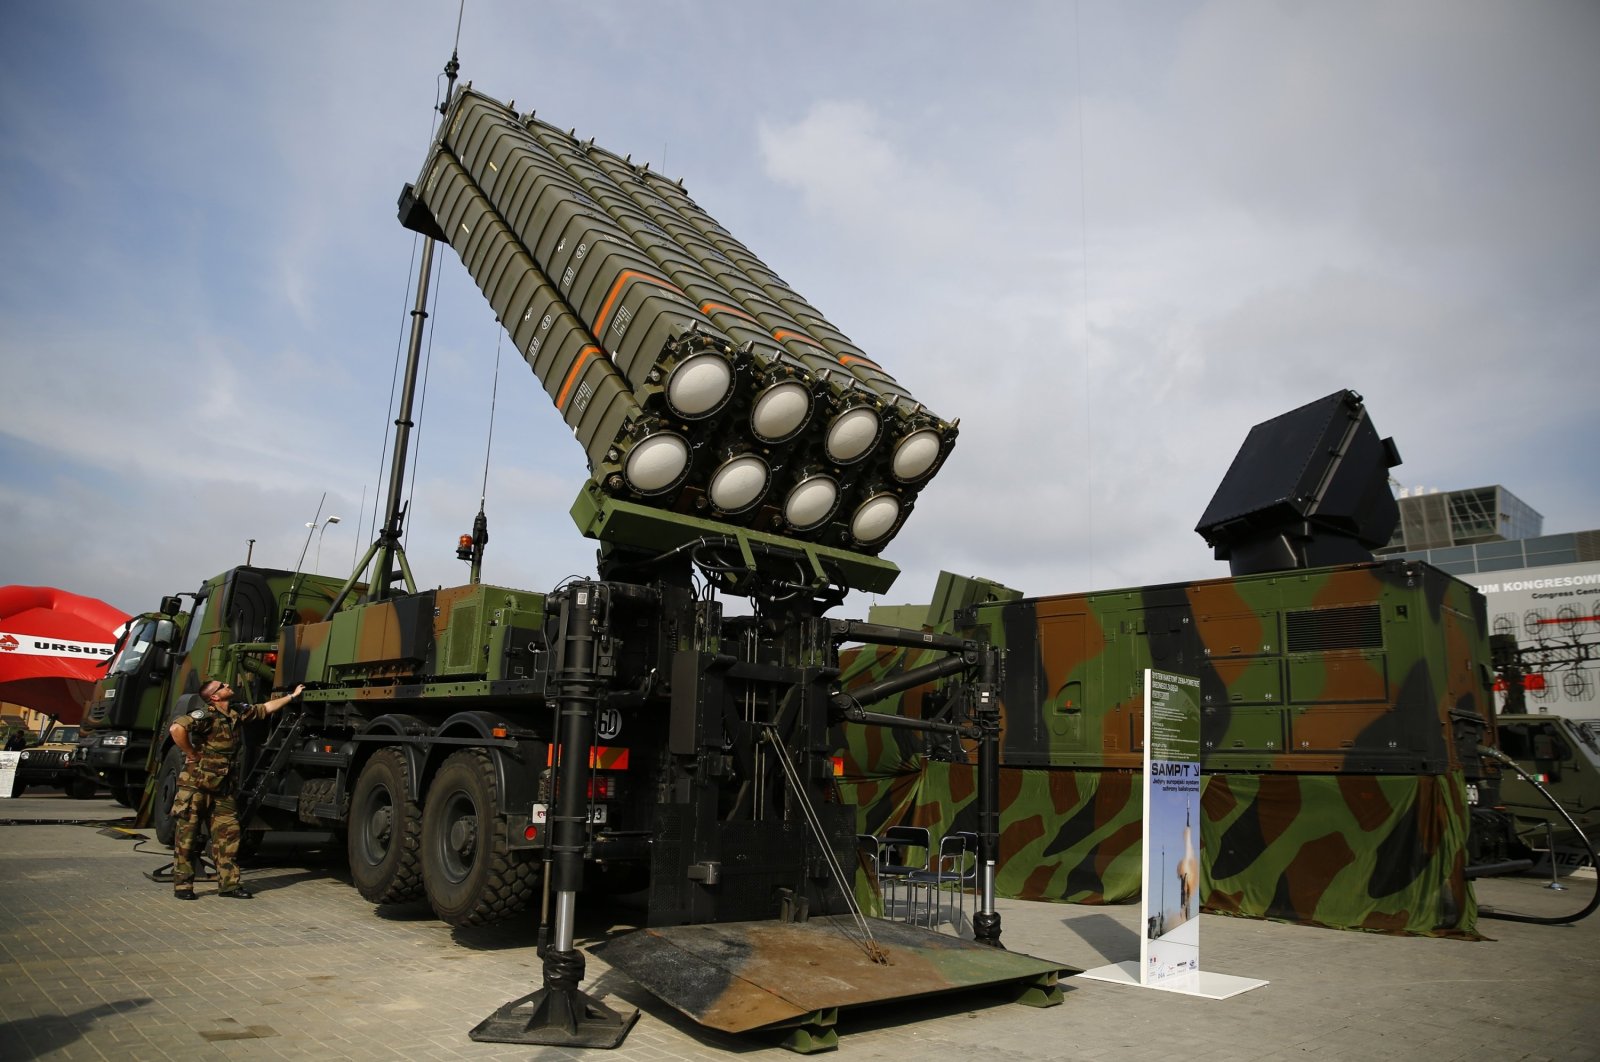 Soldiers present the anti-missile system SAMP/T by Thales at an international military fair in Kielce, southern Poland, Sept. 2, 2014. (Reuters Photo)